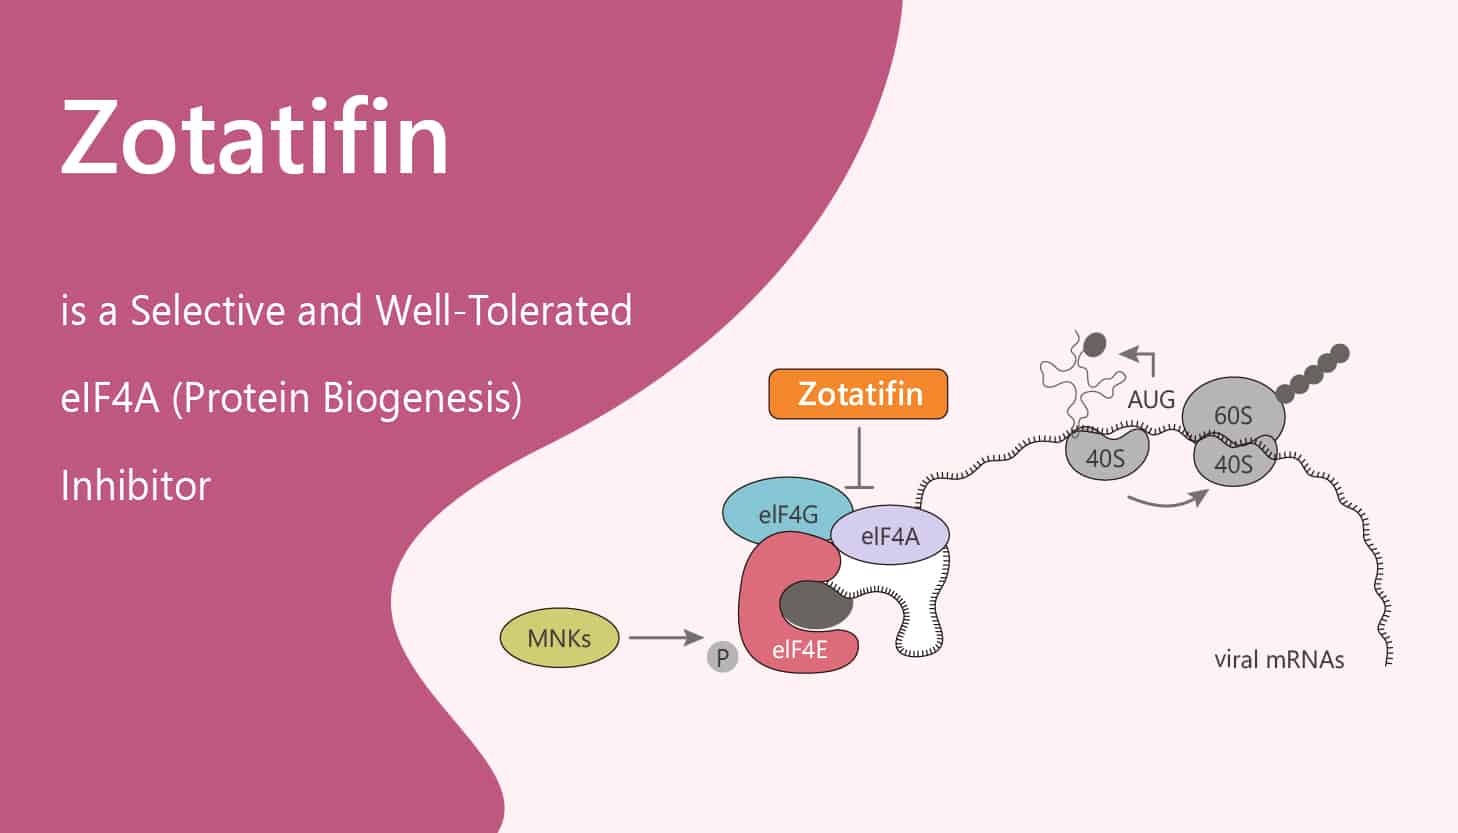 Zotatifin is a Selective and Well Tolerated eIF4A Protein Biogenesis Inhibitor 2020 05 14 - Zotatifin is a Selective and Well-Tolerated eIF4A (Protein Biogenesis) Inhibitor